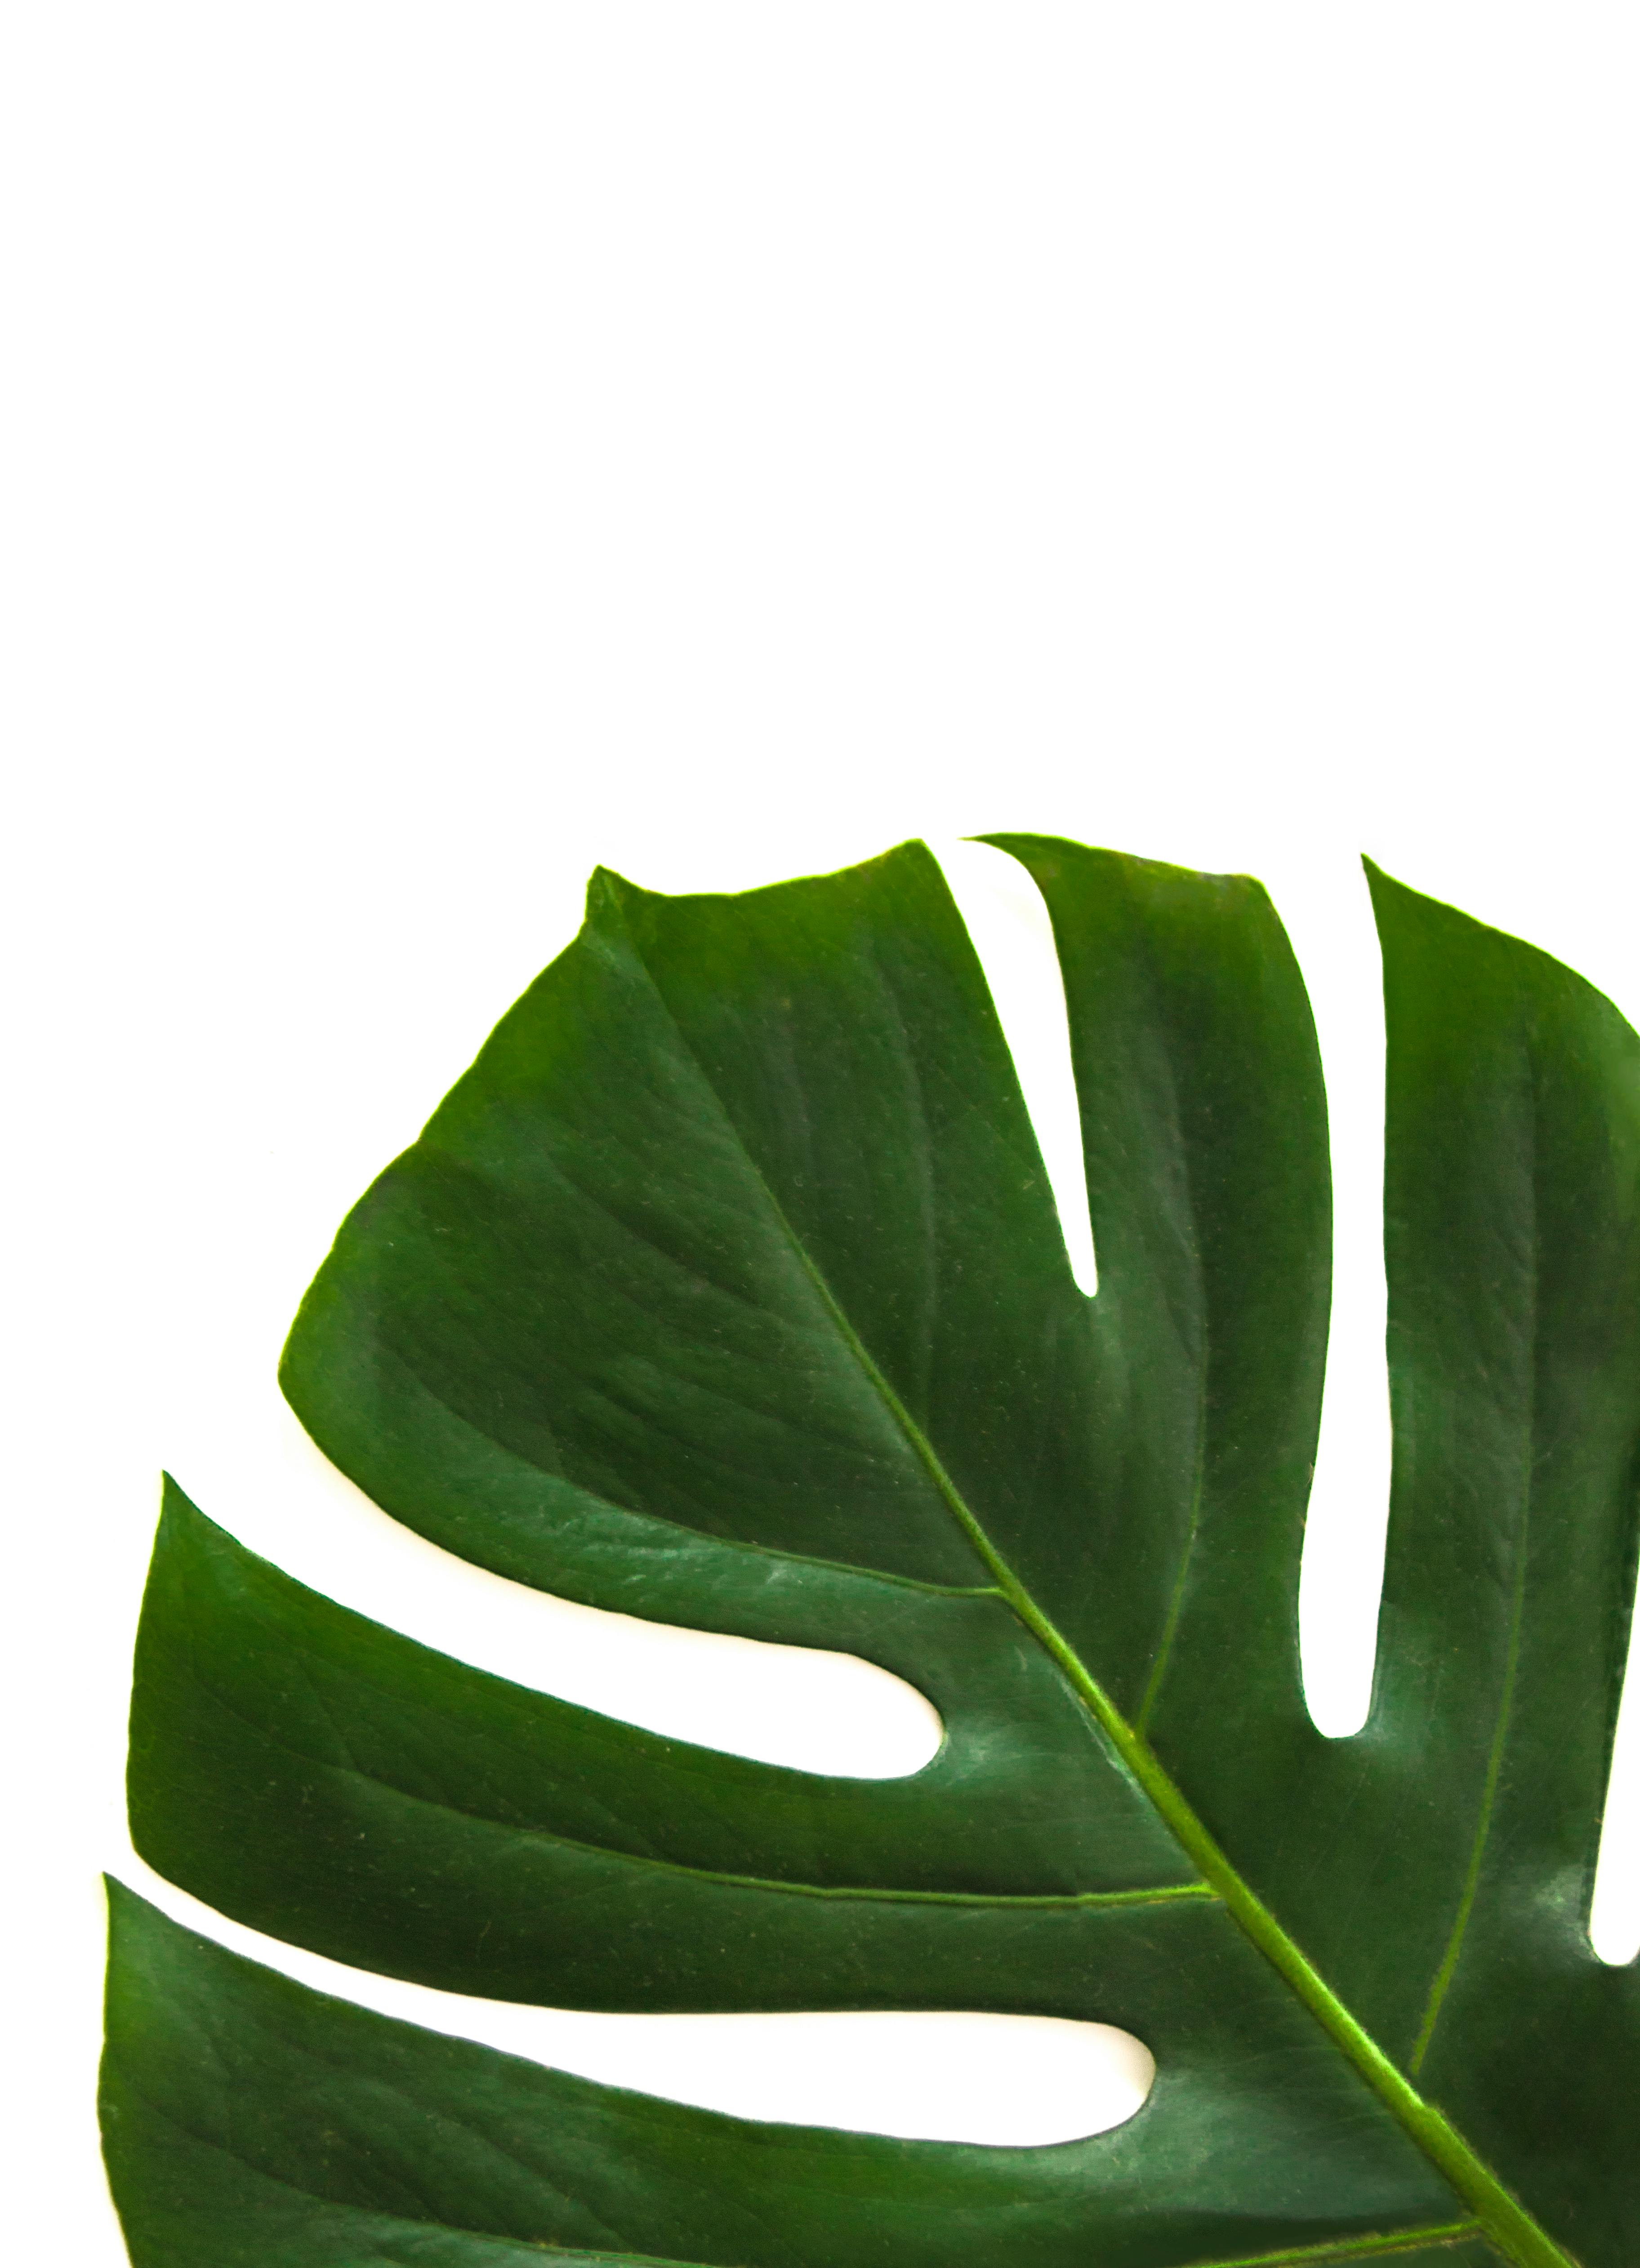 Browse Free HD Images of Dark Green Leaf Showing The Details